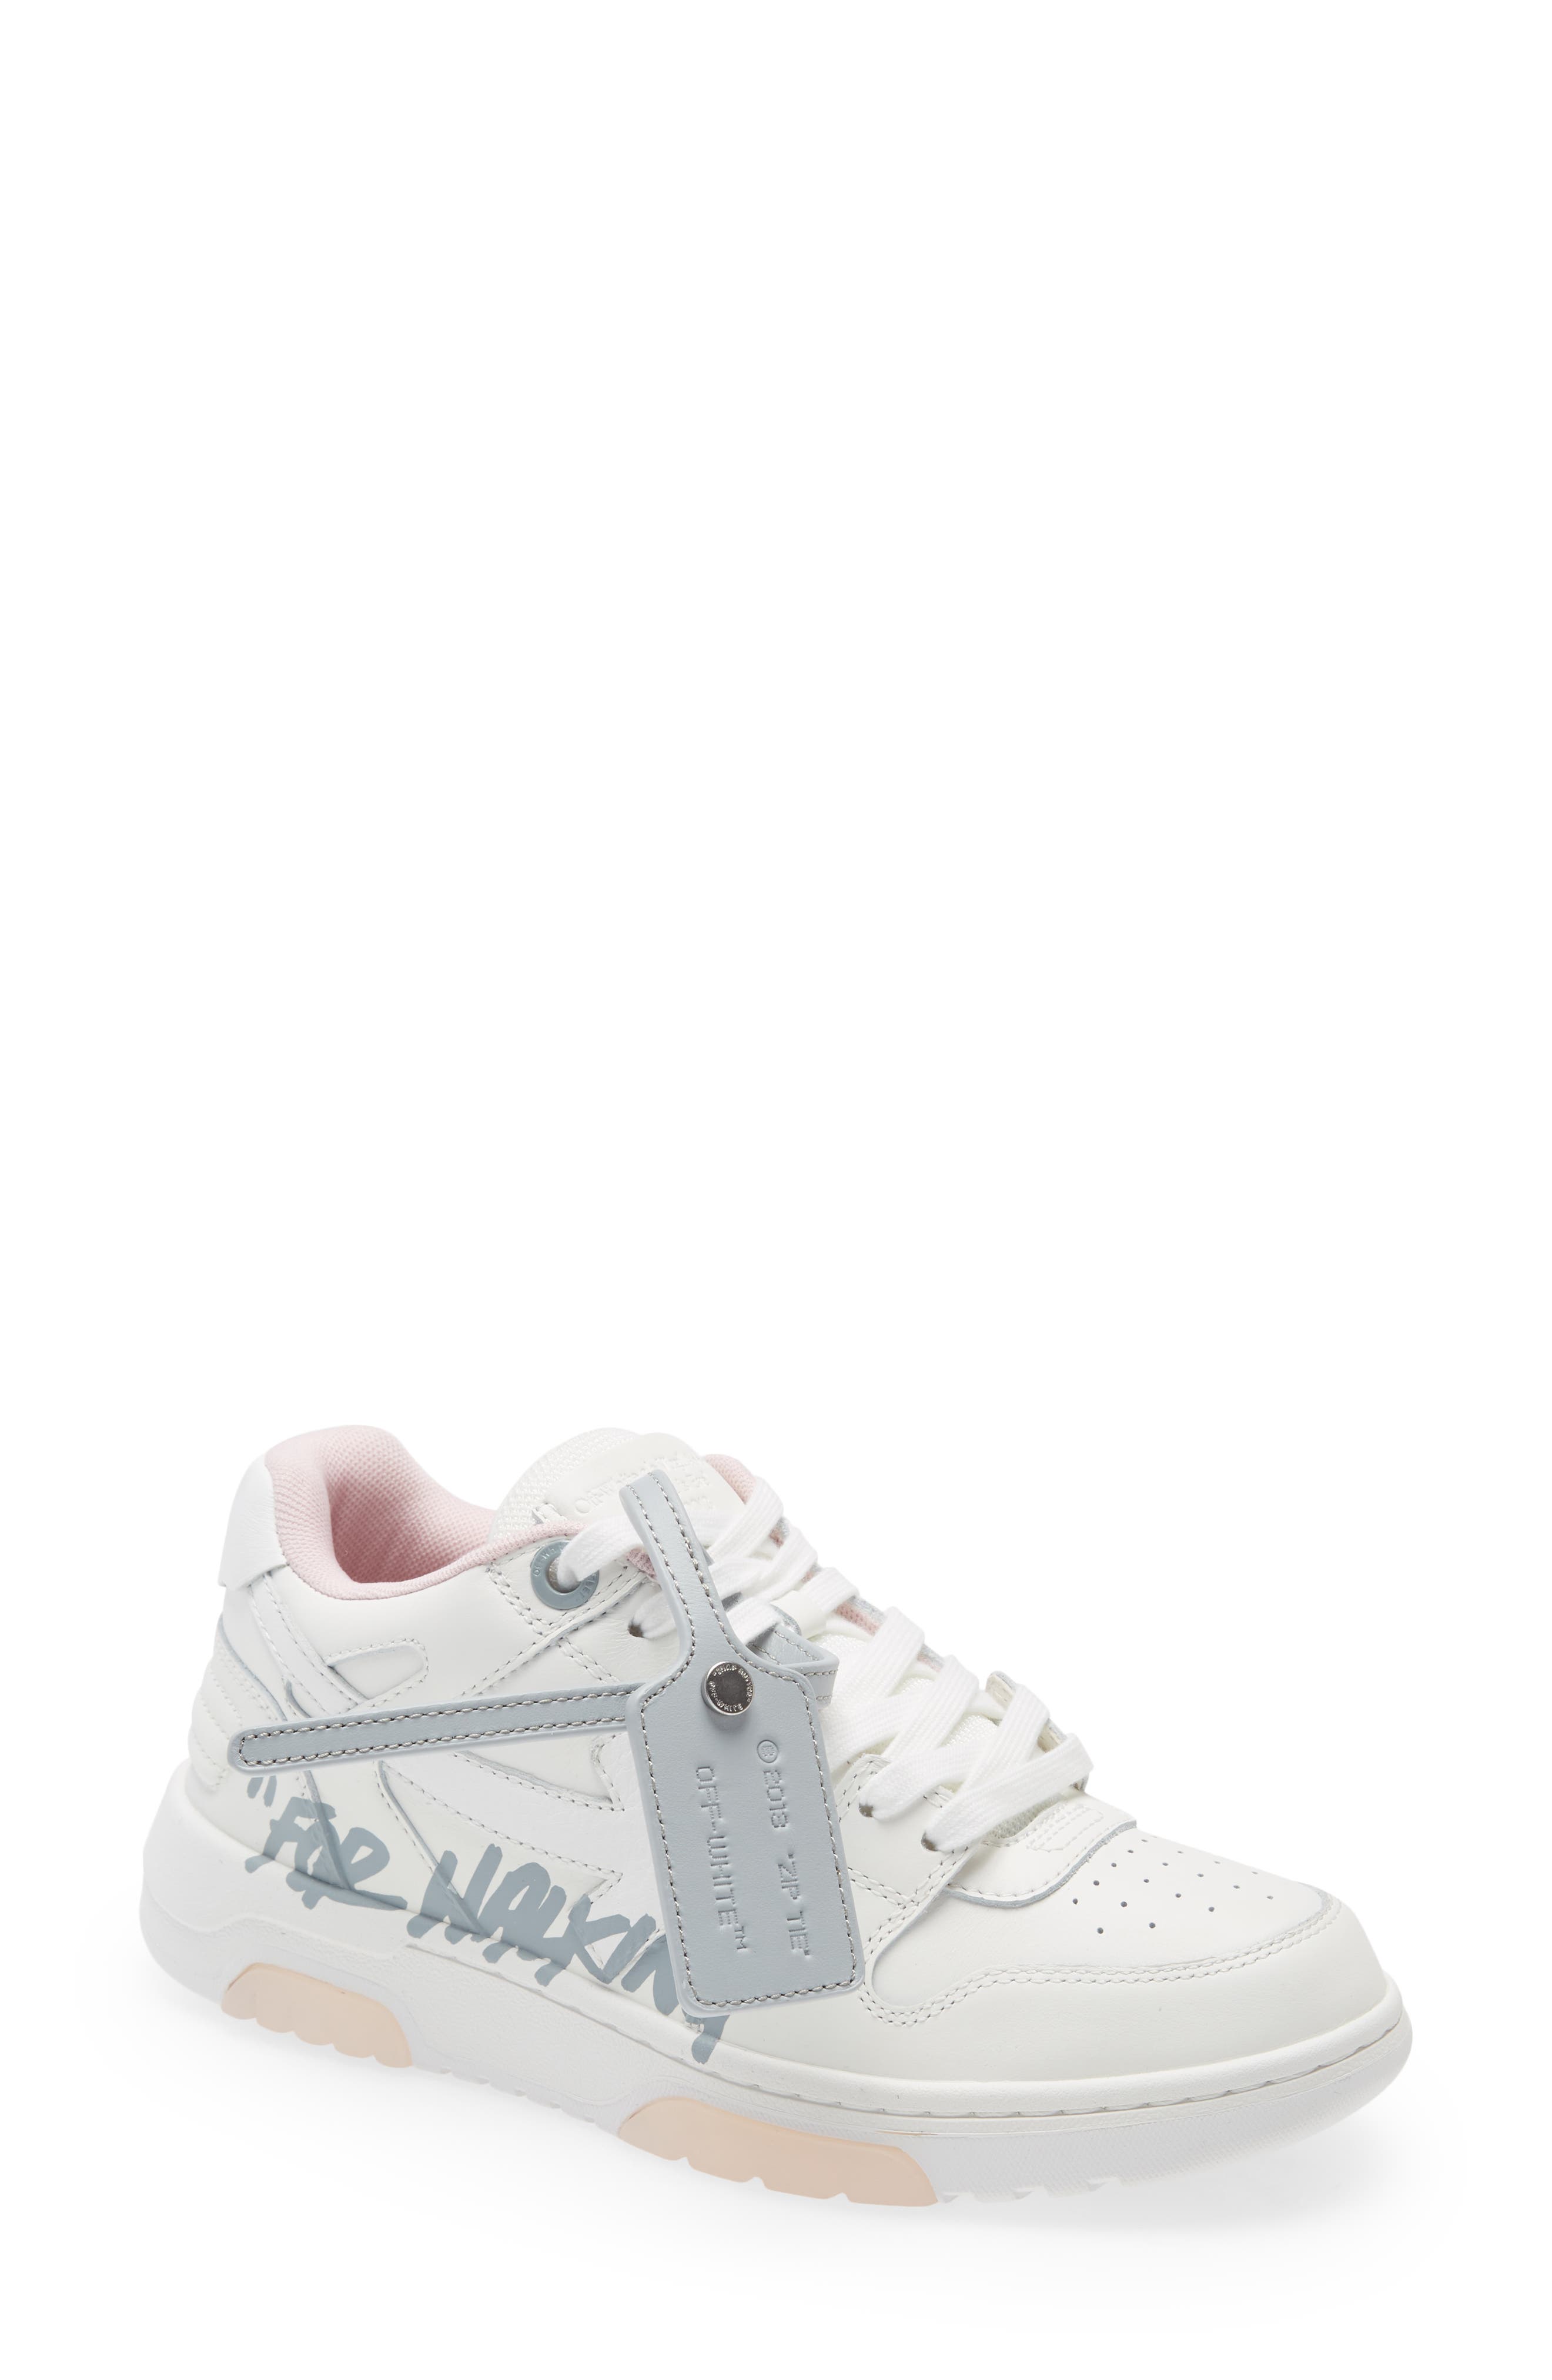 for walking sneakers off white